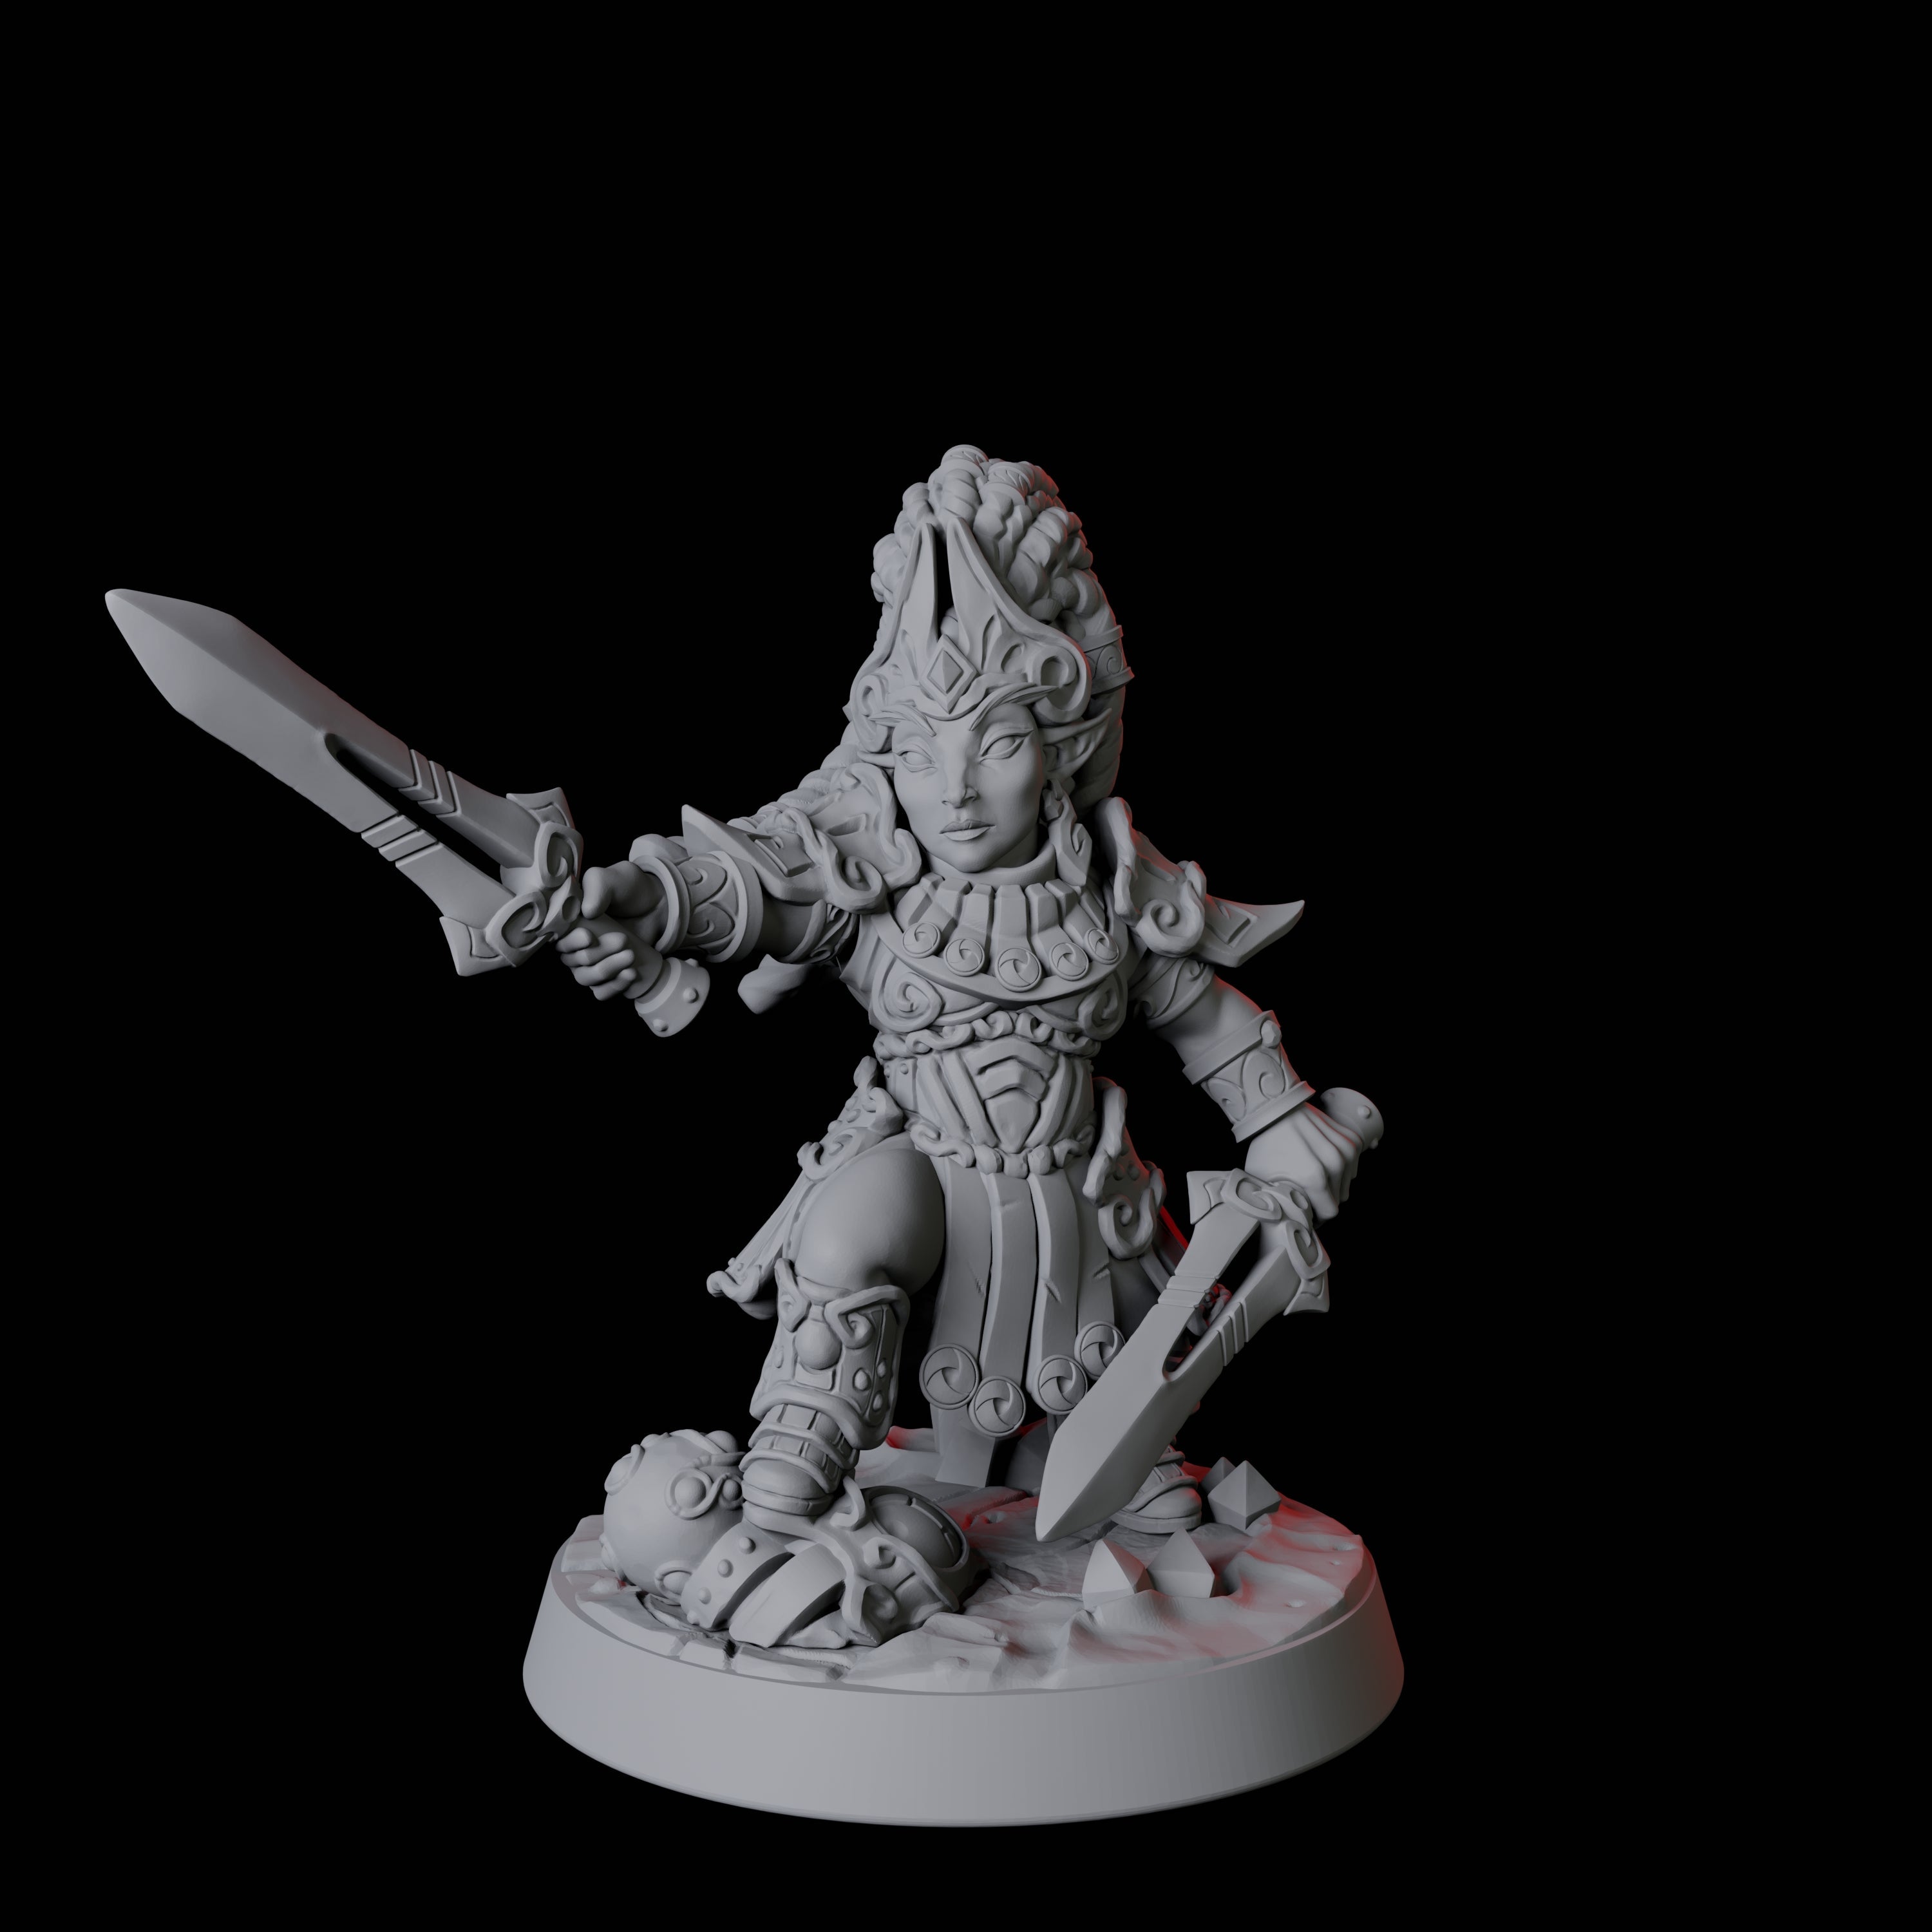 Gnome Queen Miniature for Dungeons and Dragons, Pathfinder or other TTRPGs